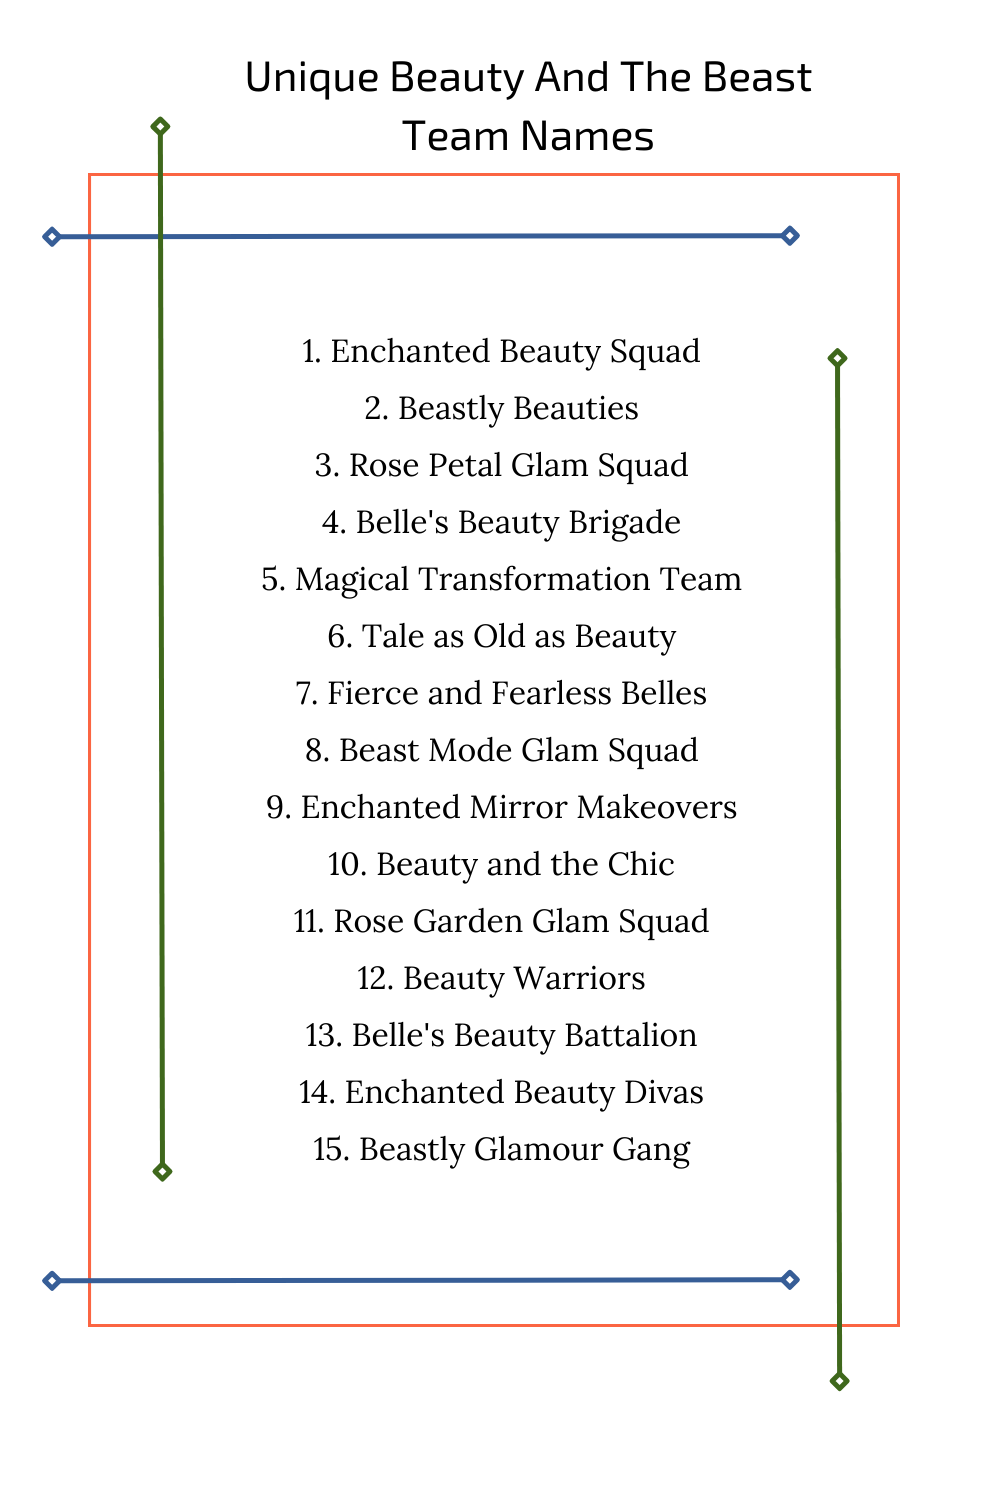 Unique Beauty And The Beast Team Names